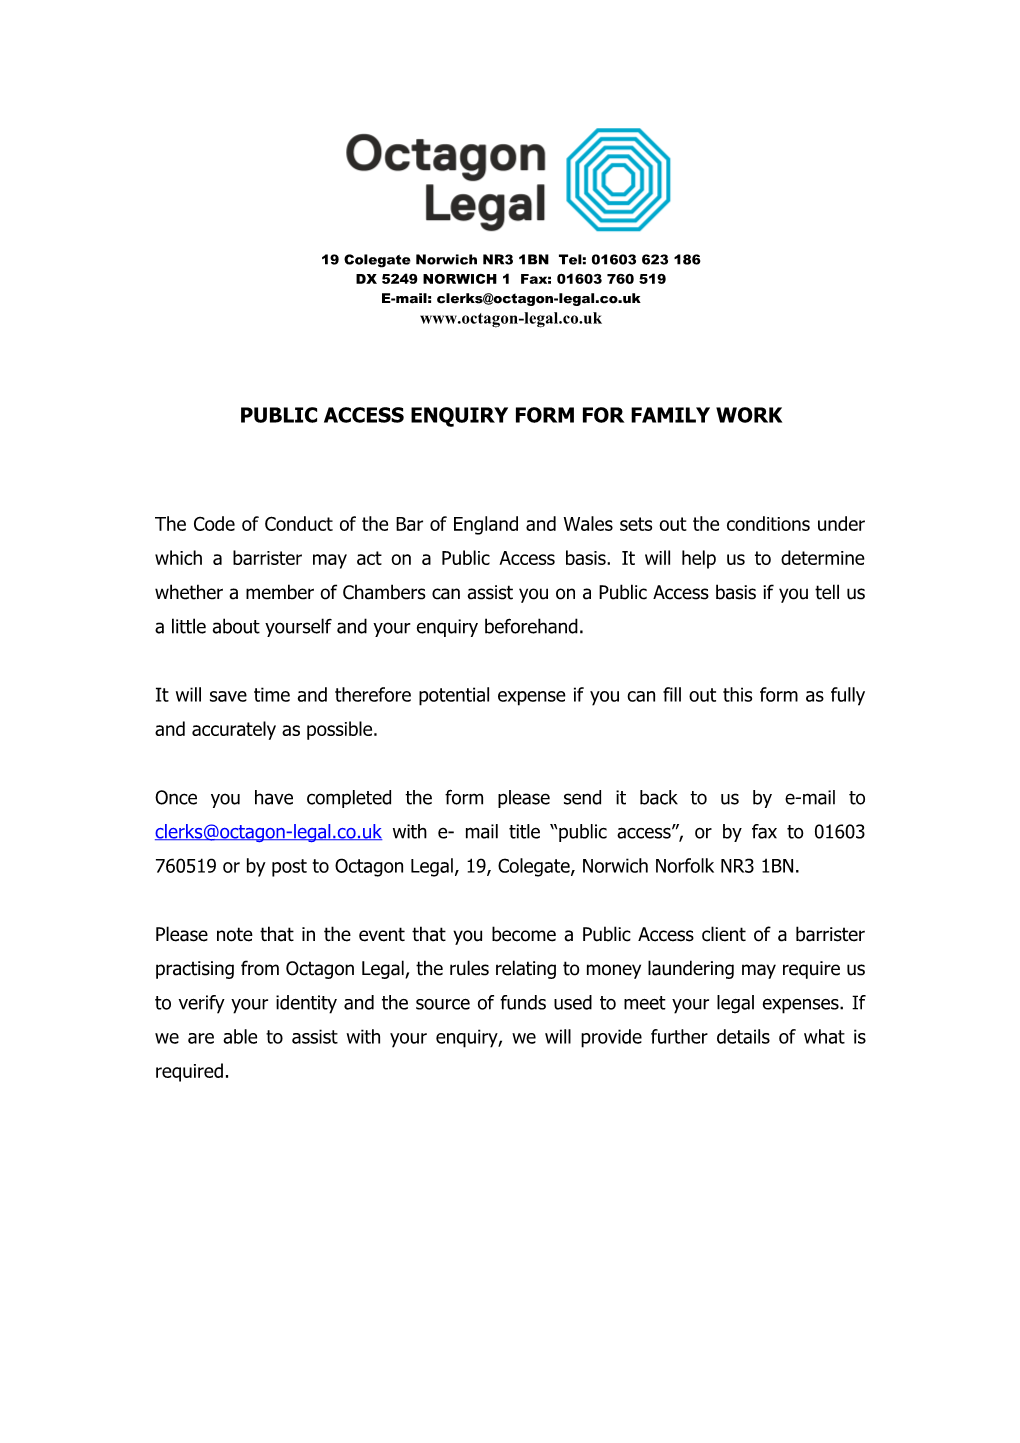 Public Access Enquiry Form for Family Work